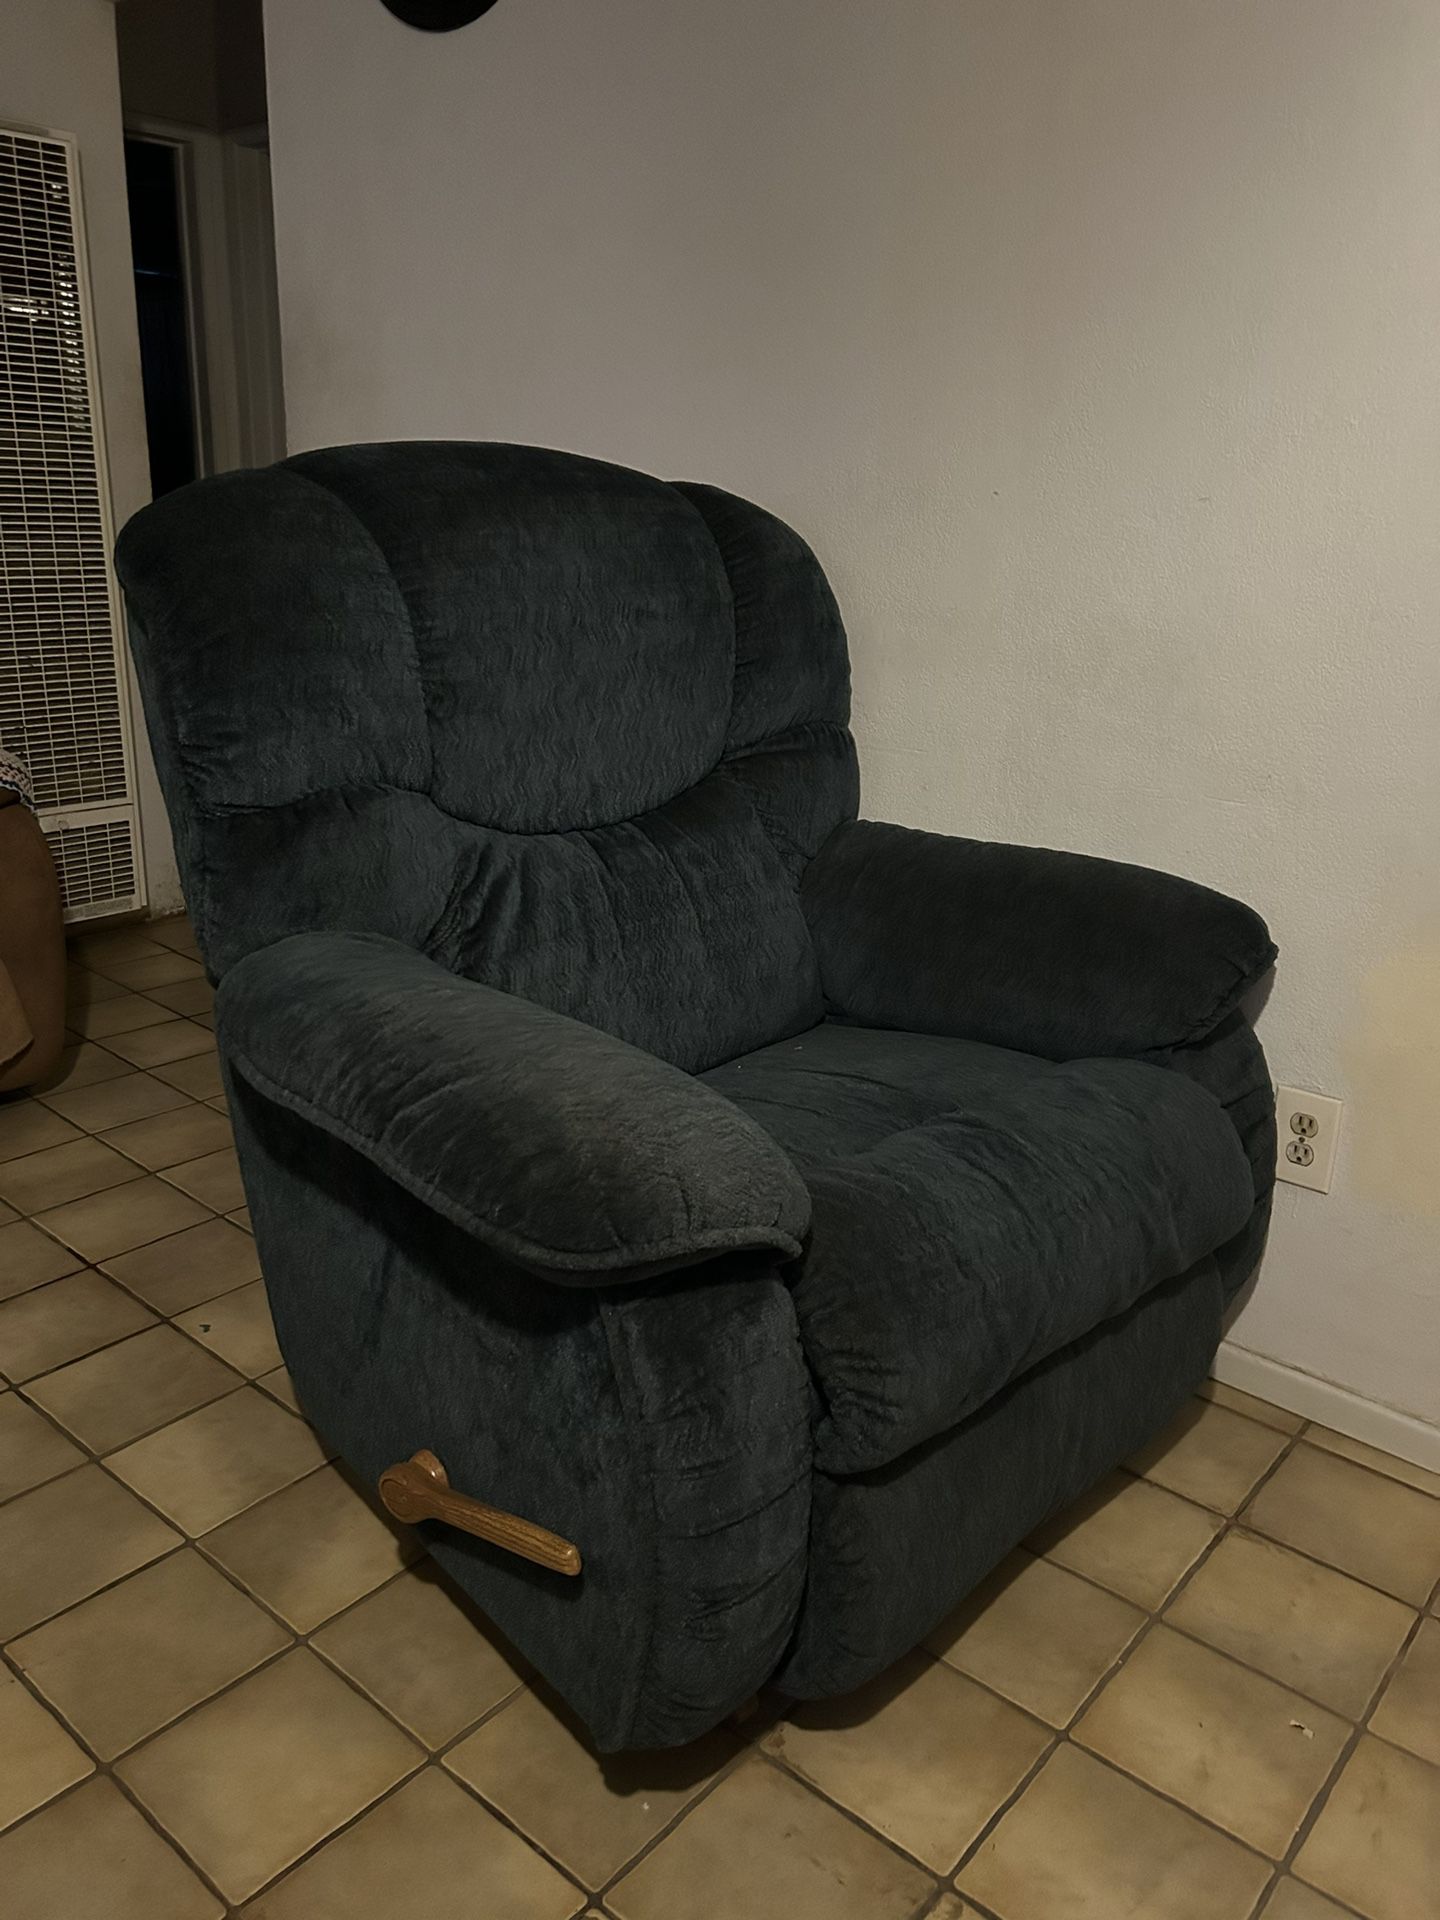 Recliner Couch Soft